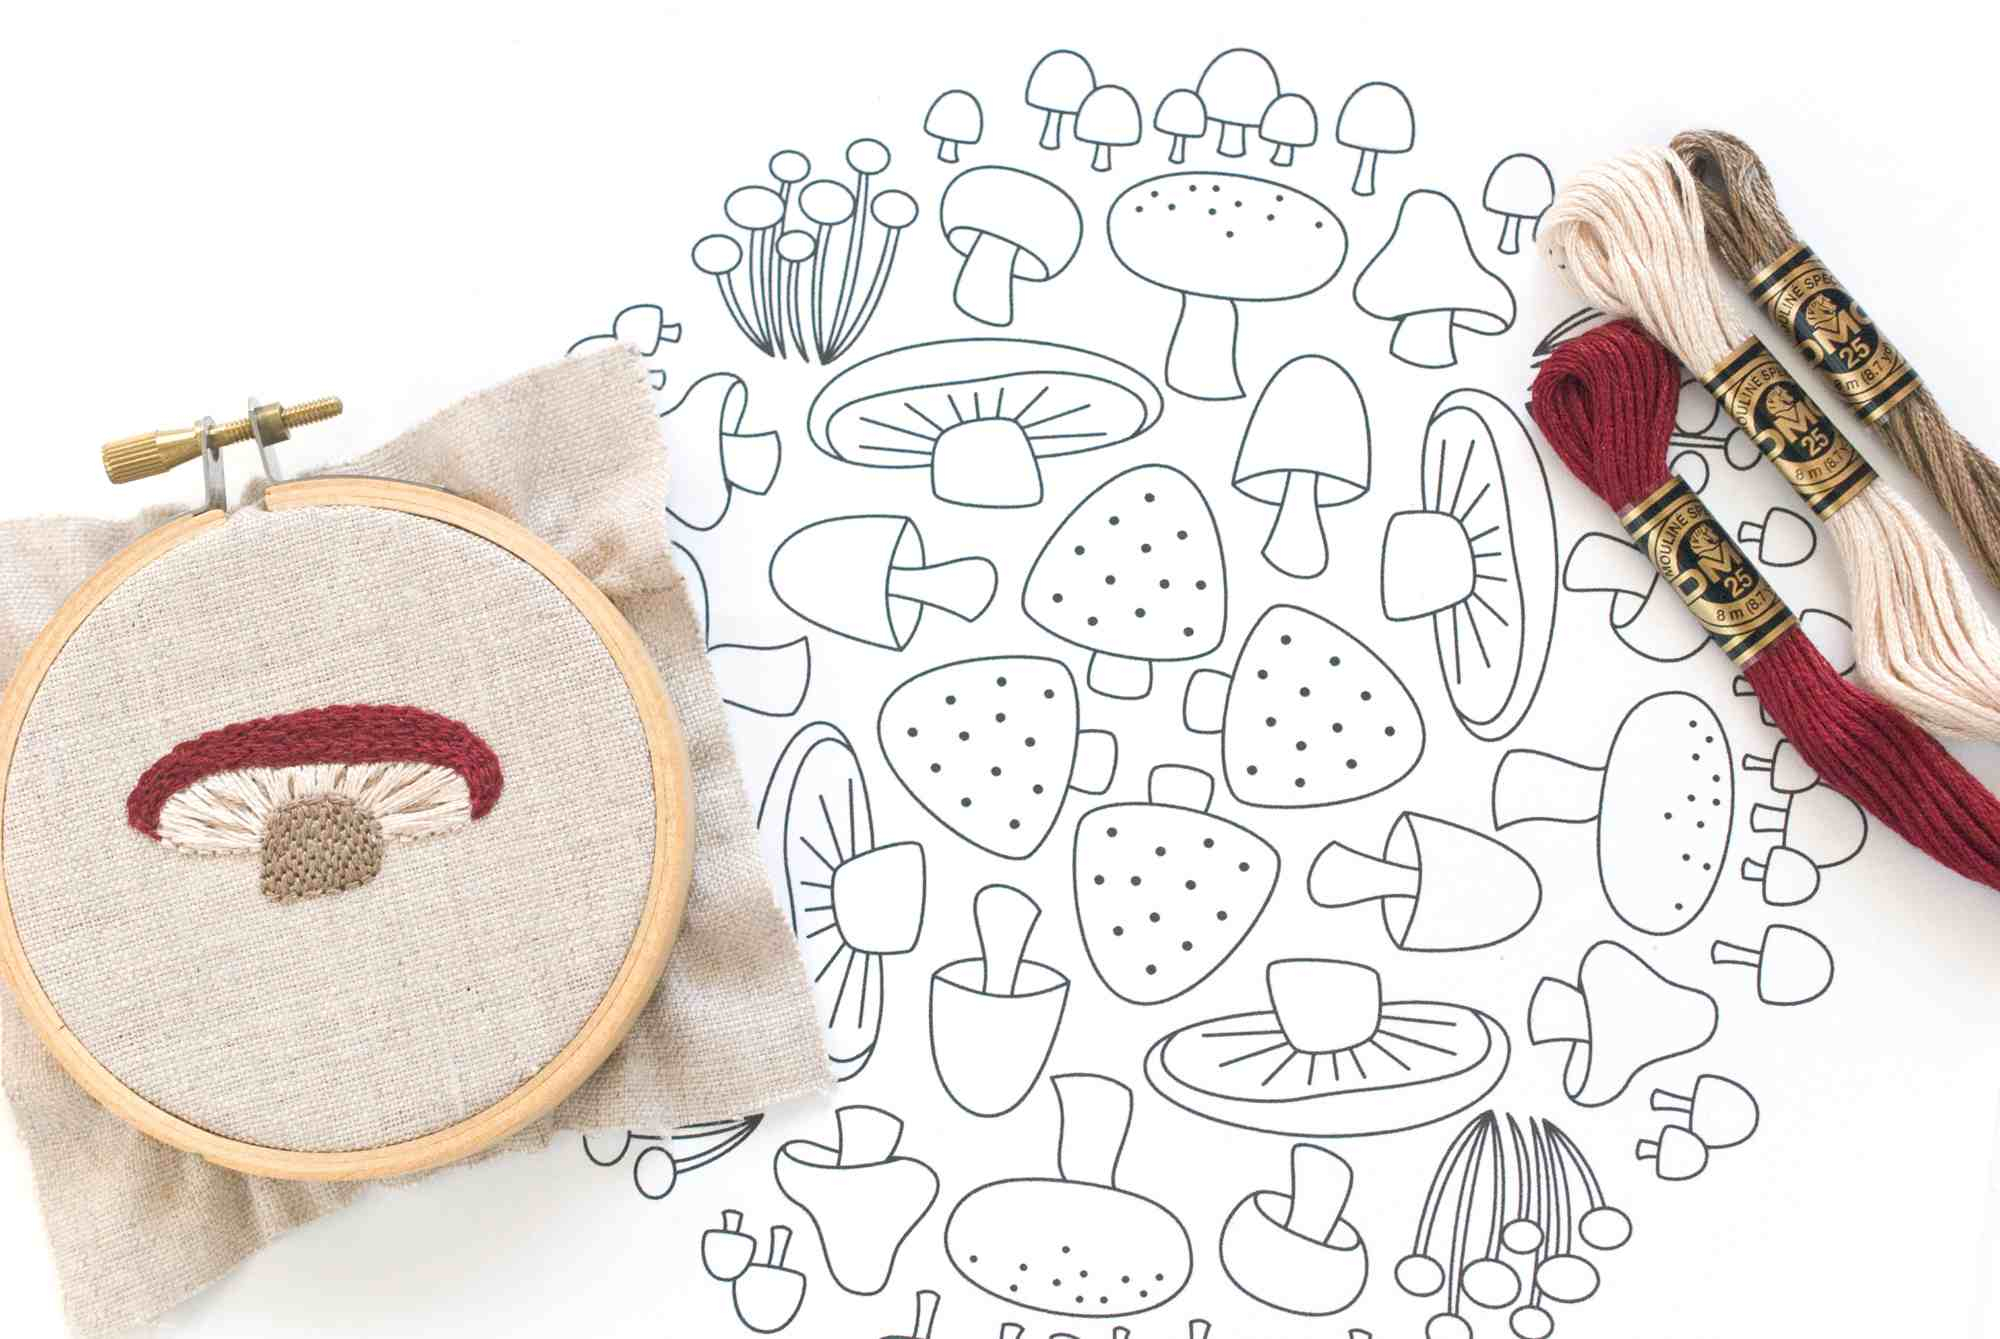 Free Printable Embroidery Patterns By Hand Our Top 25 Free Embroidery Designs